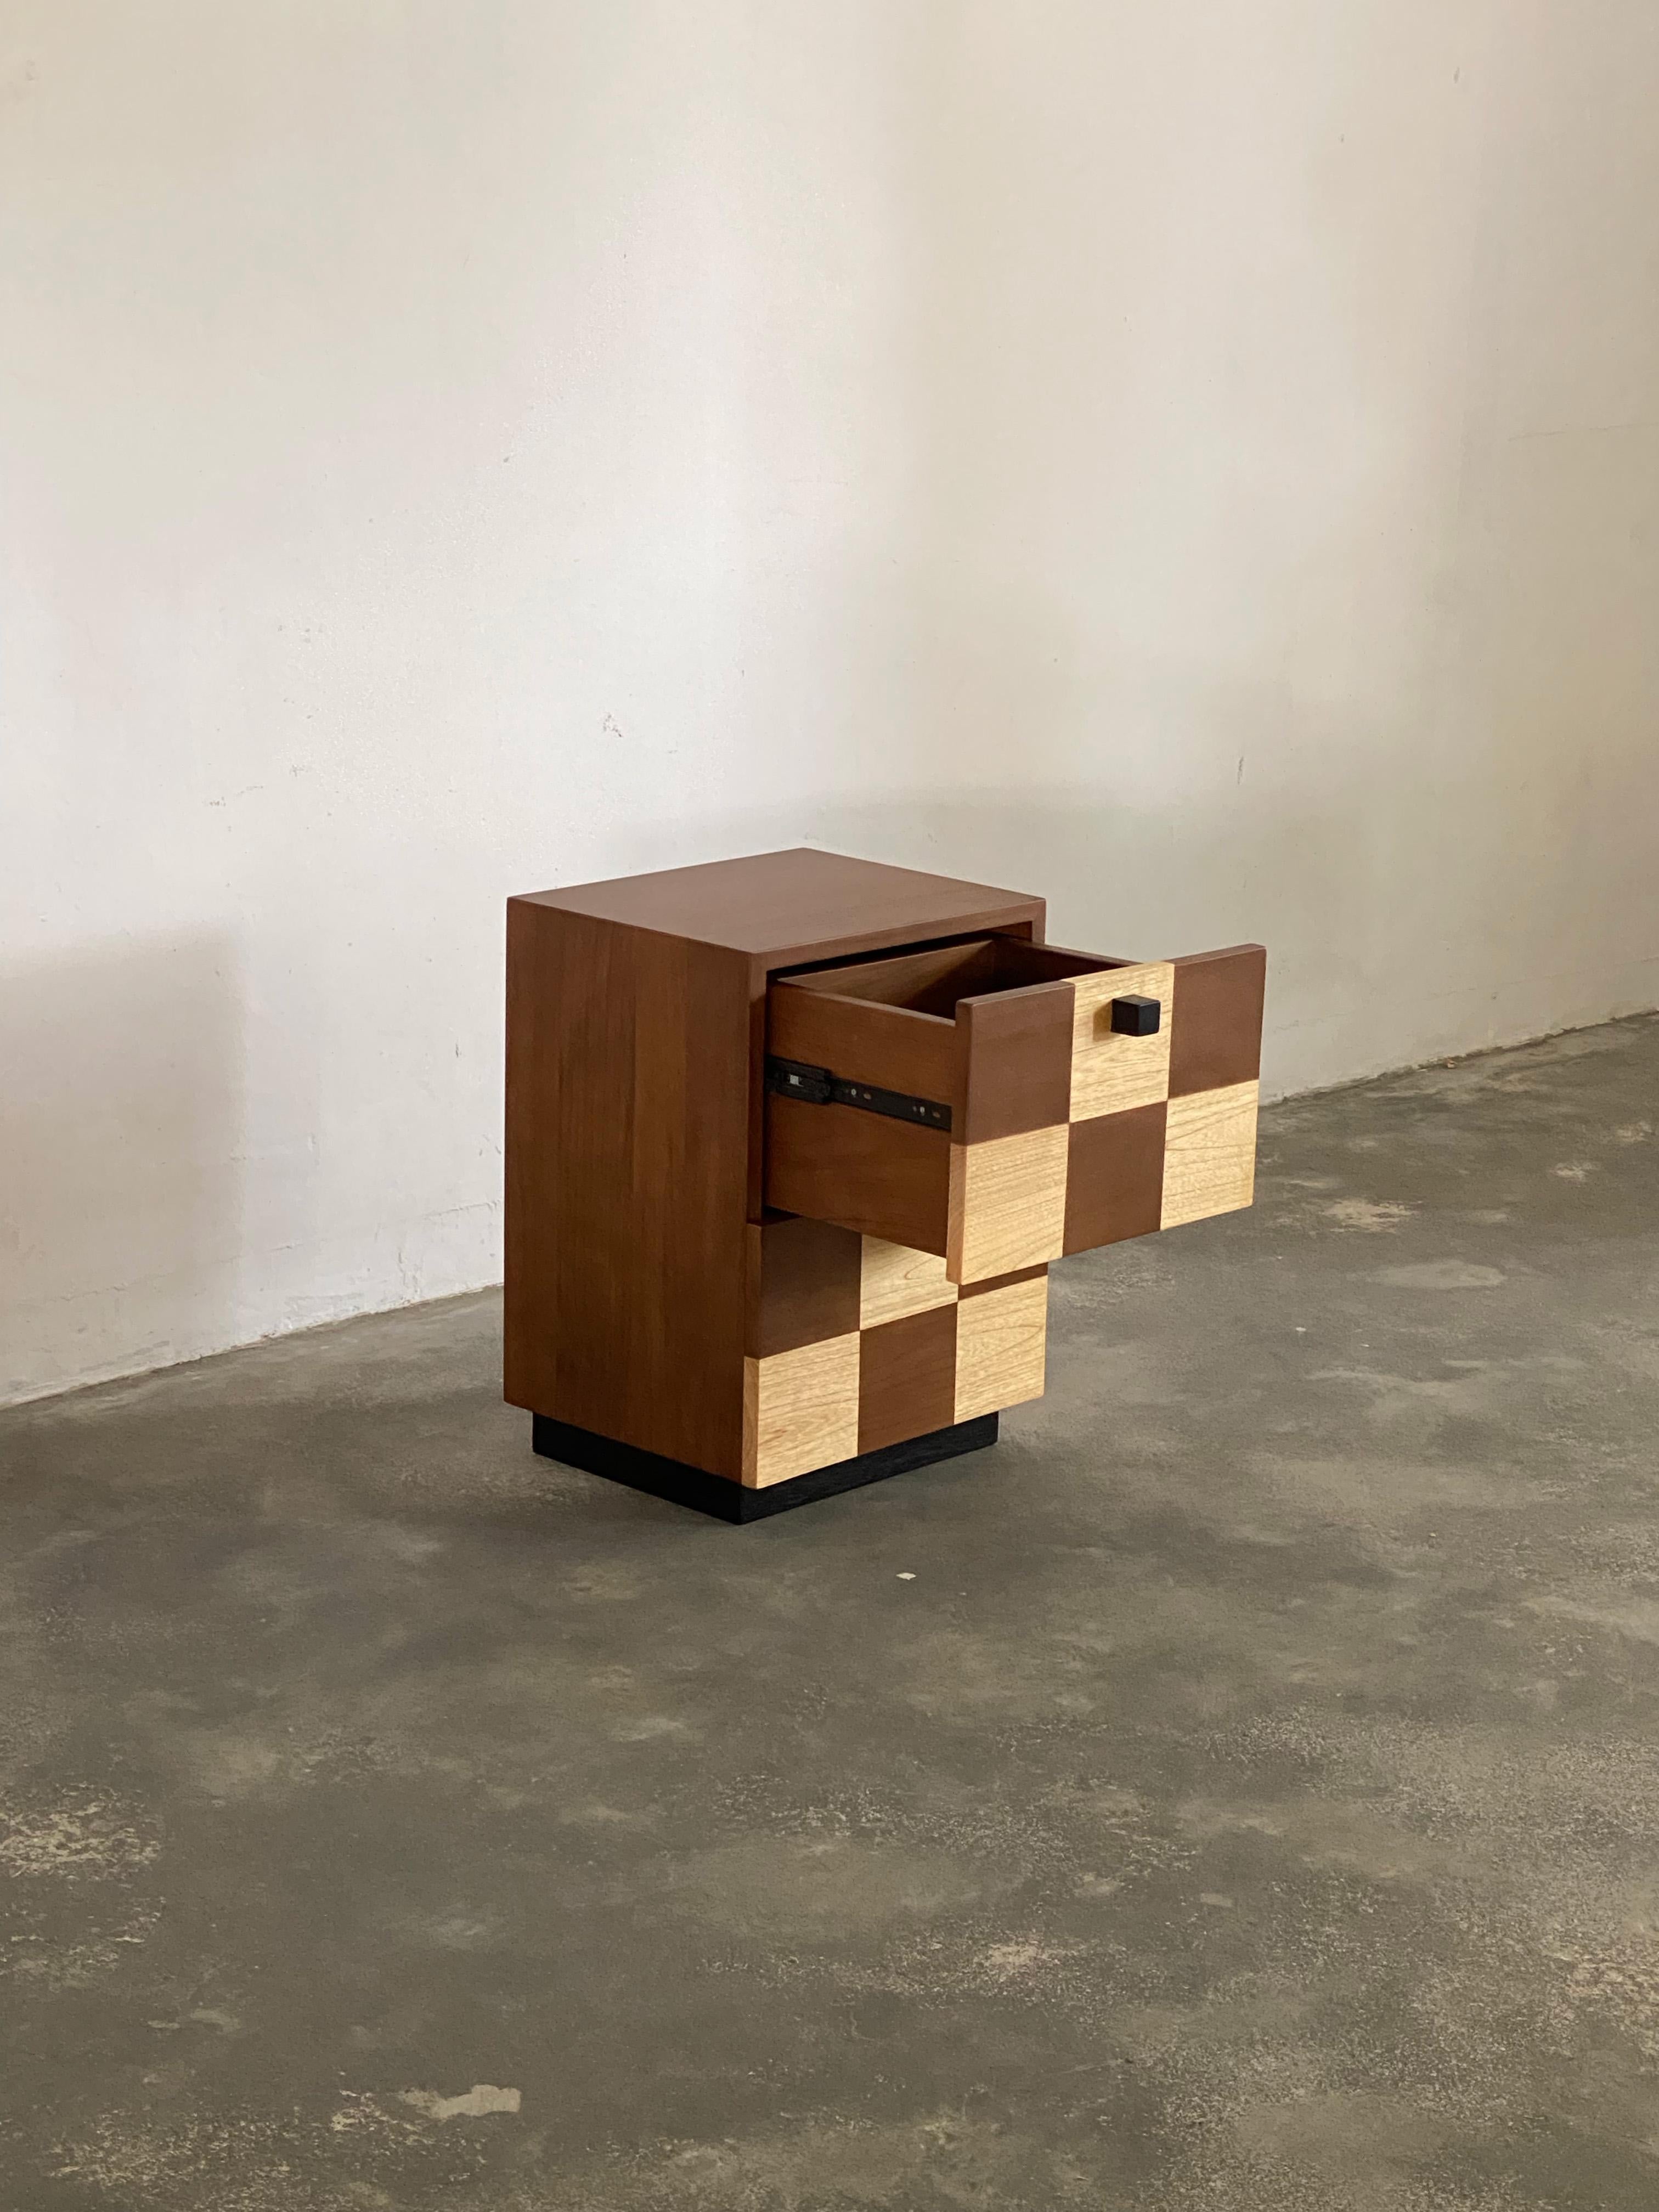 Designed by Studio Kallang and handcrafted by generational artisans in Central Java. The Coklat bedside is an ode to classic midcentury modern forms with a modern, playful twist. Handcrafted from solid teak and sungkai wood native to the region.